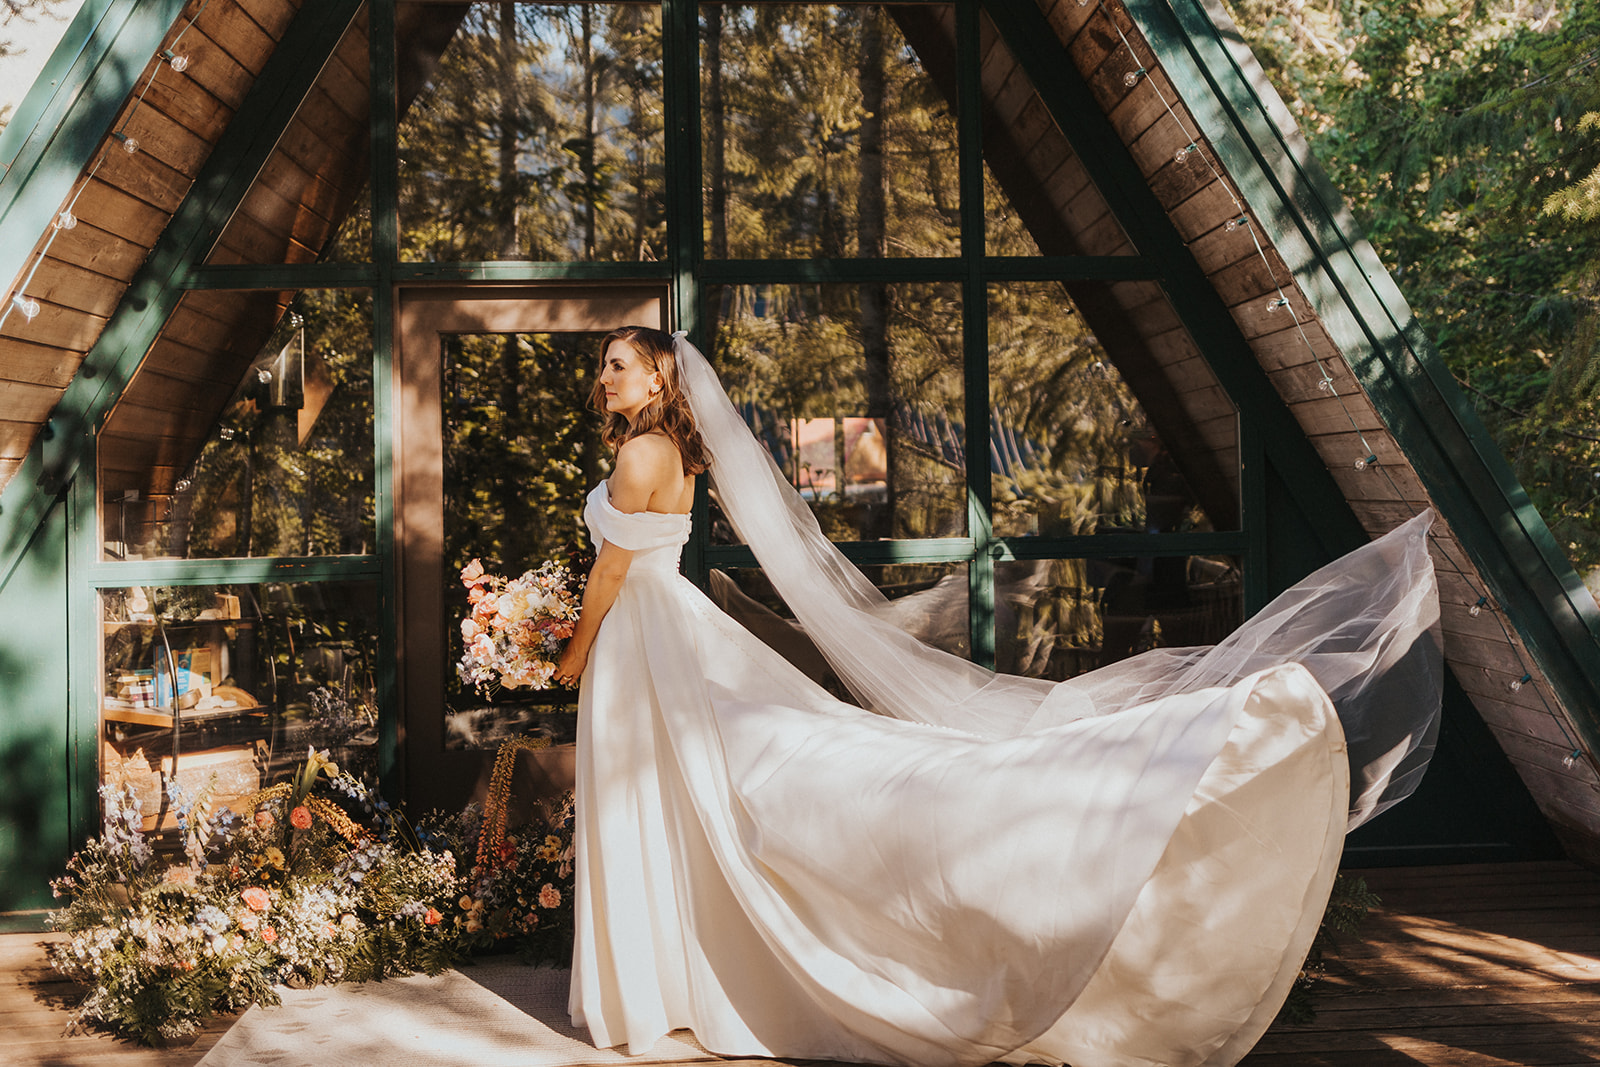 A-Frame Cabin Elopement in the Pacific Northwest – Washington Photographer